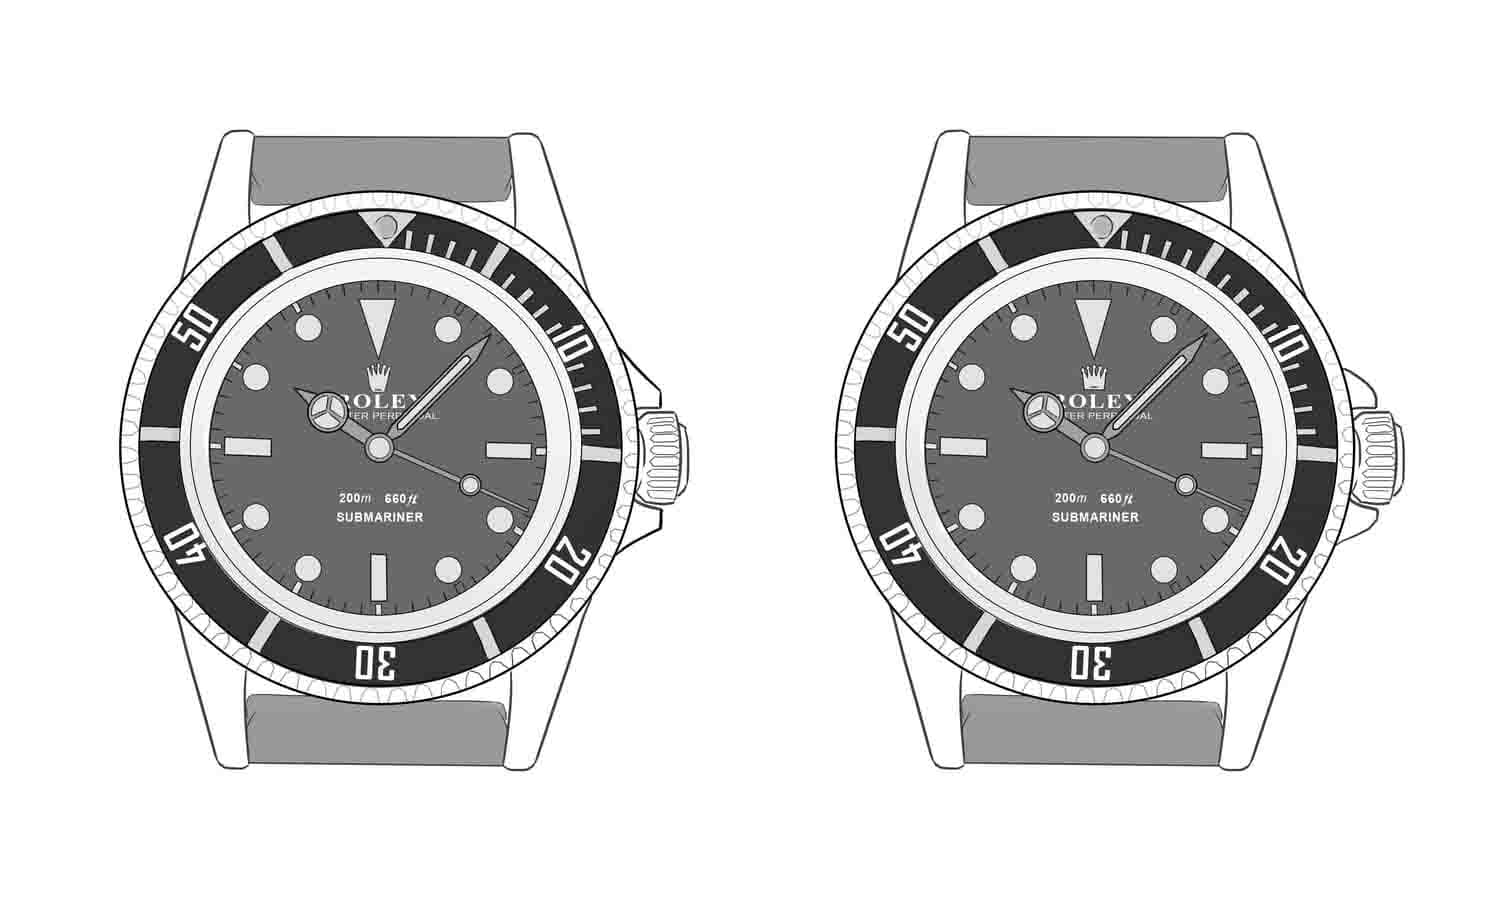 square crown guards vs pointy submariner 5512